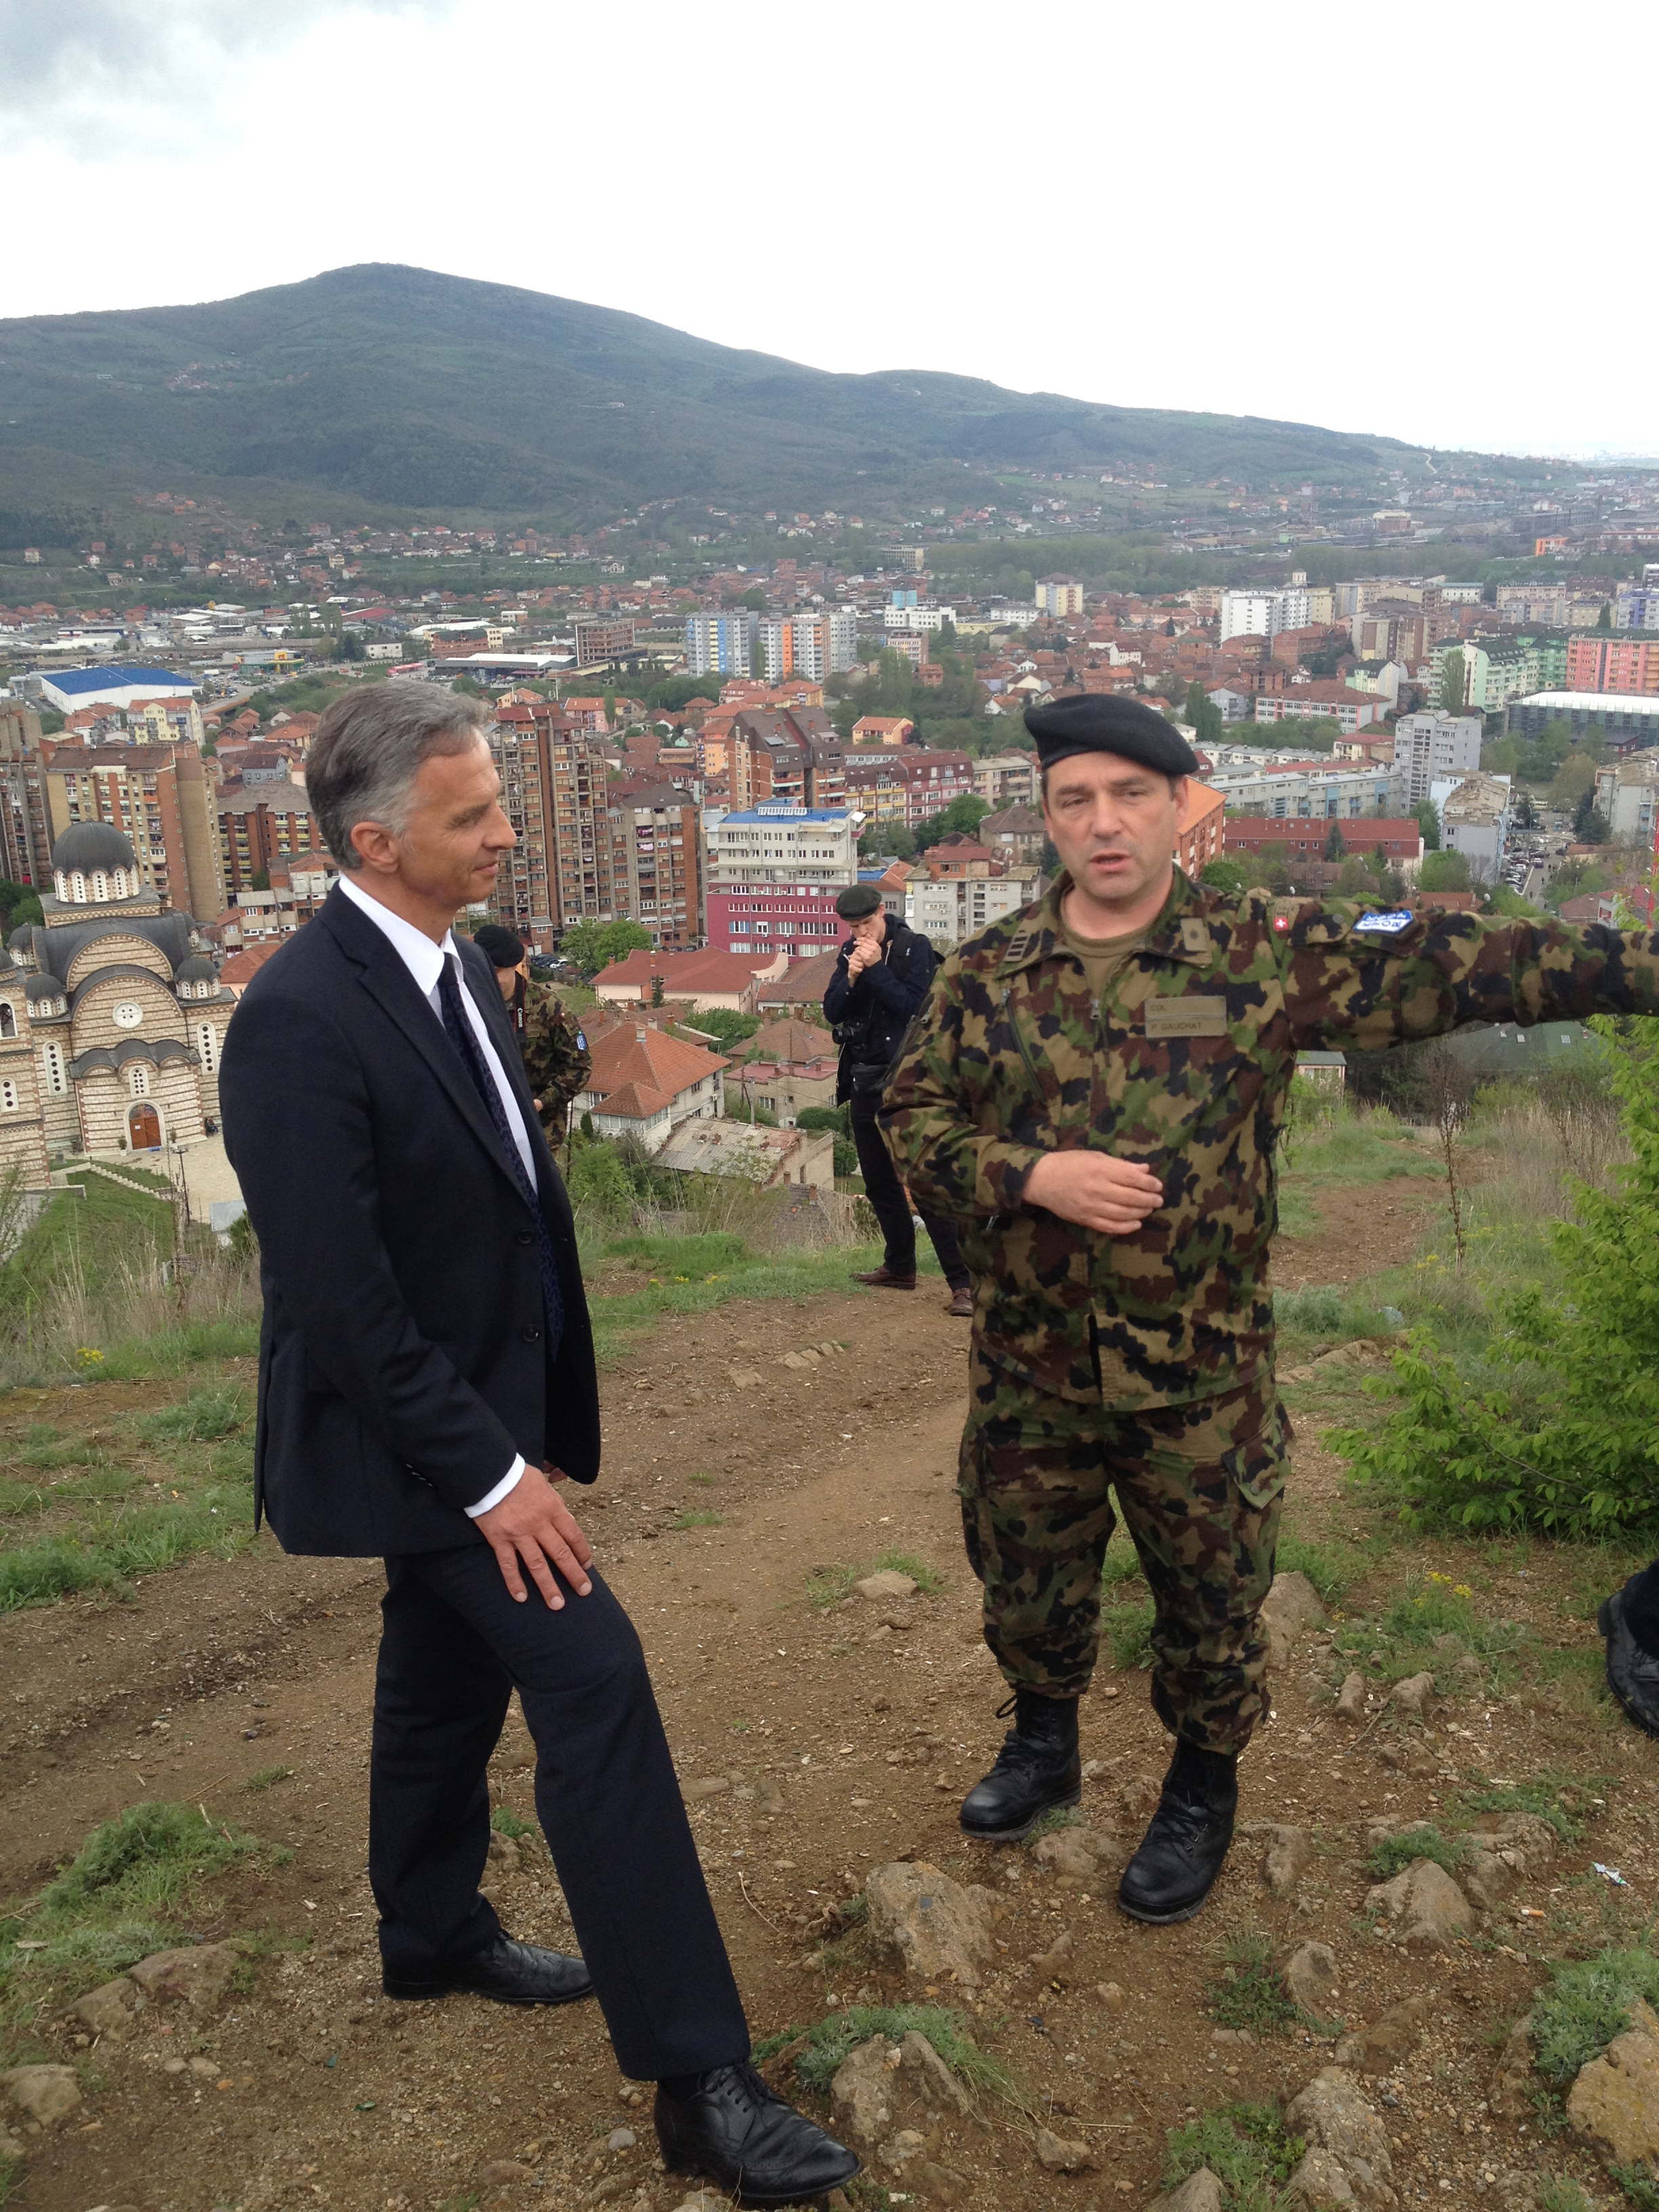 President of the Confederation Didier Burkhalter and Colonel Patrick Gauchat speak about the activities of Swisscoy in Northern Kosovo 